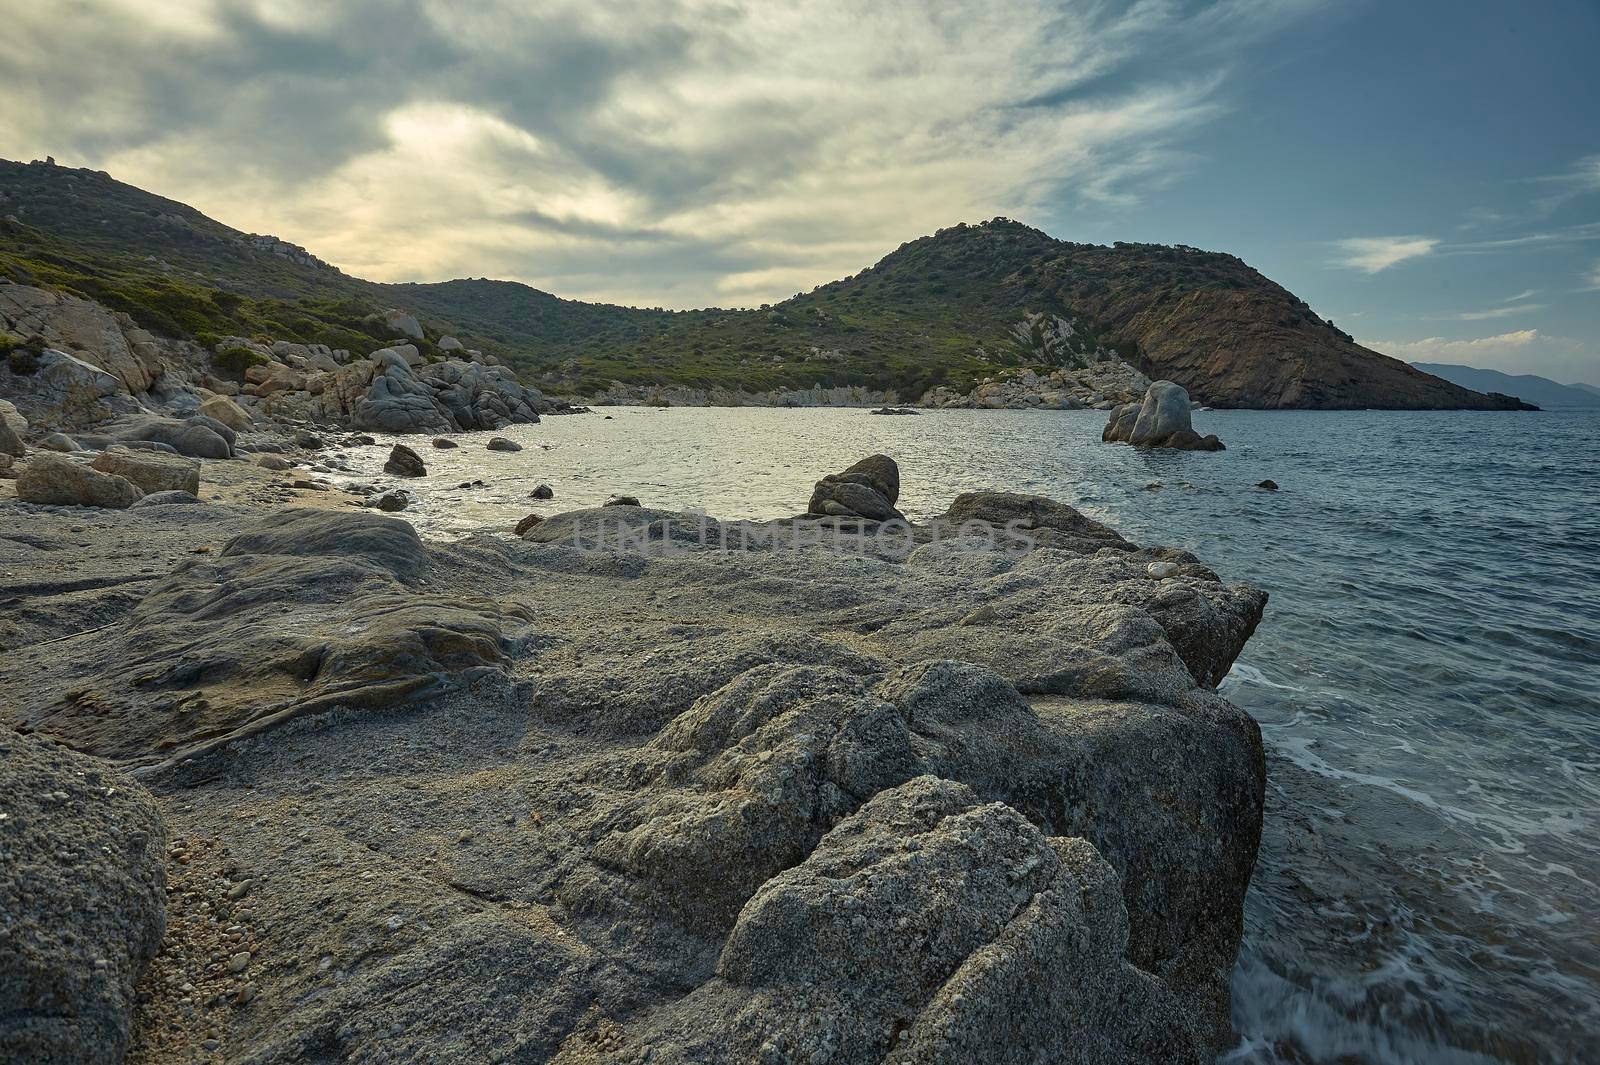 Beautiful Mediterranean beach typical of the coast of southern Sardinia taken over in summer. The beach, the rocks and the mountains behind blend in a wonderful panorama of amazing beauty.